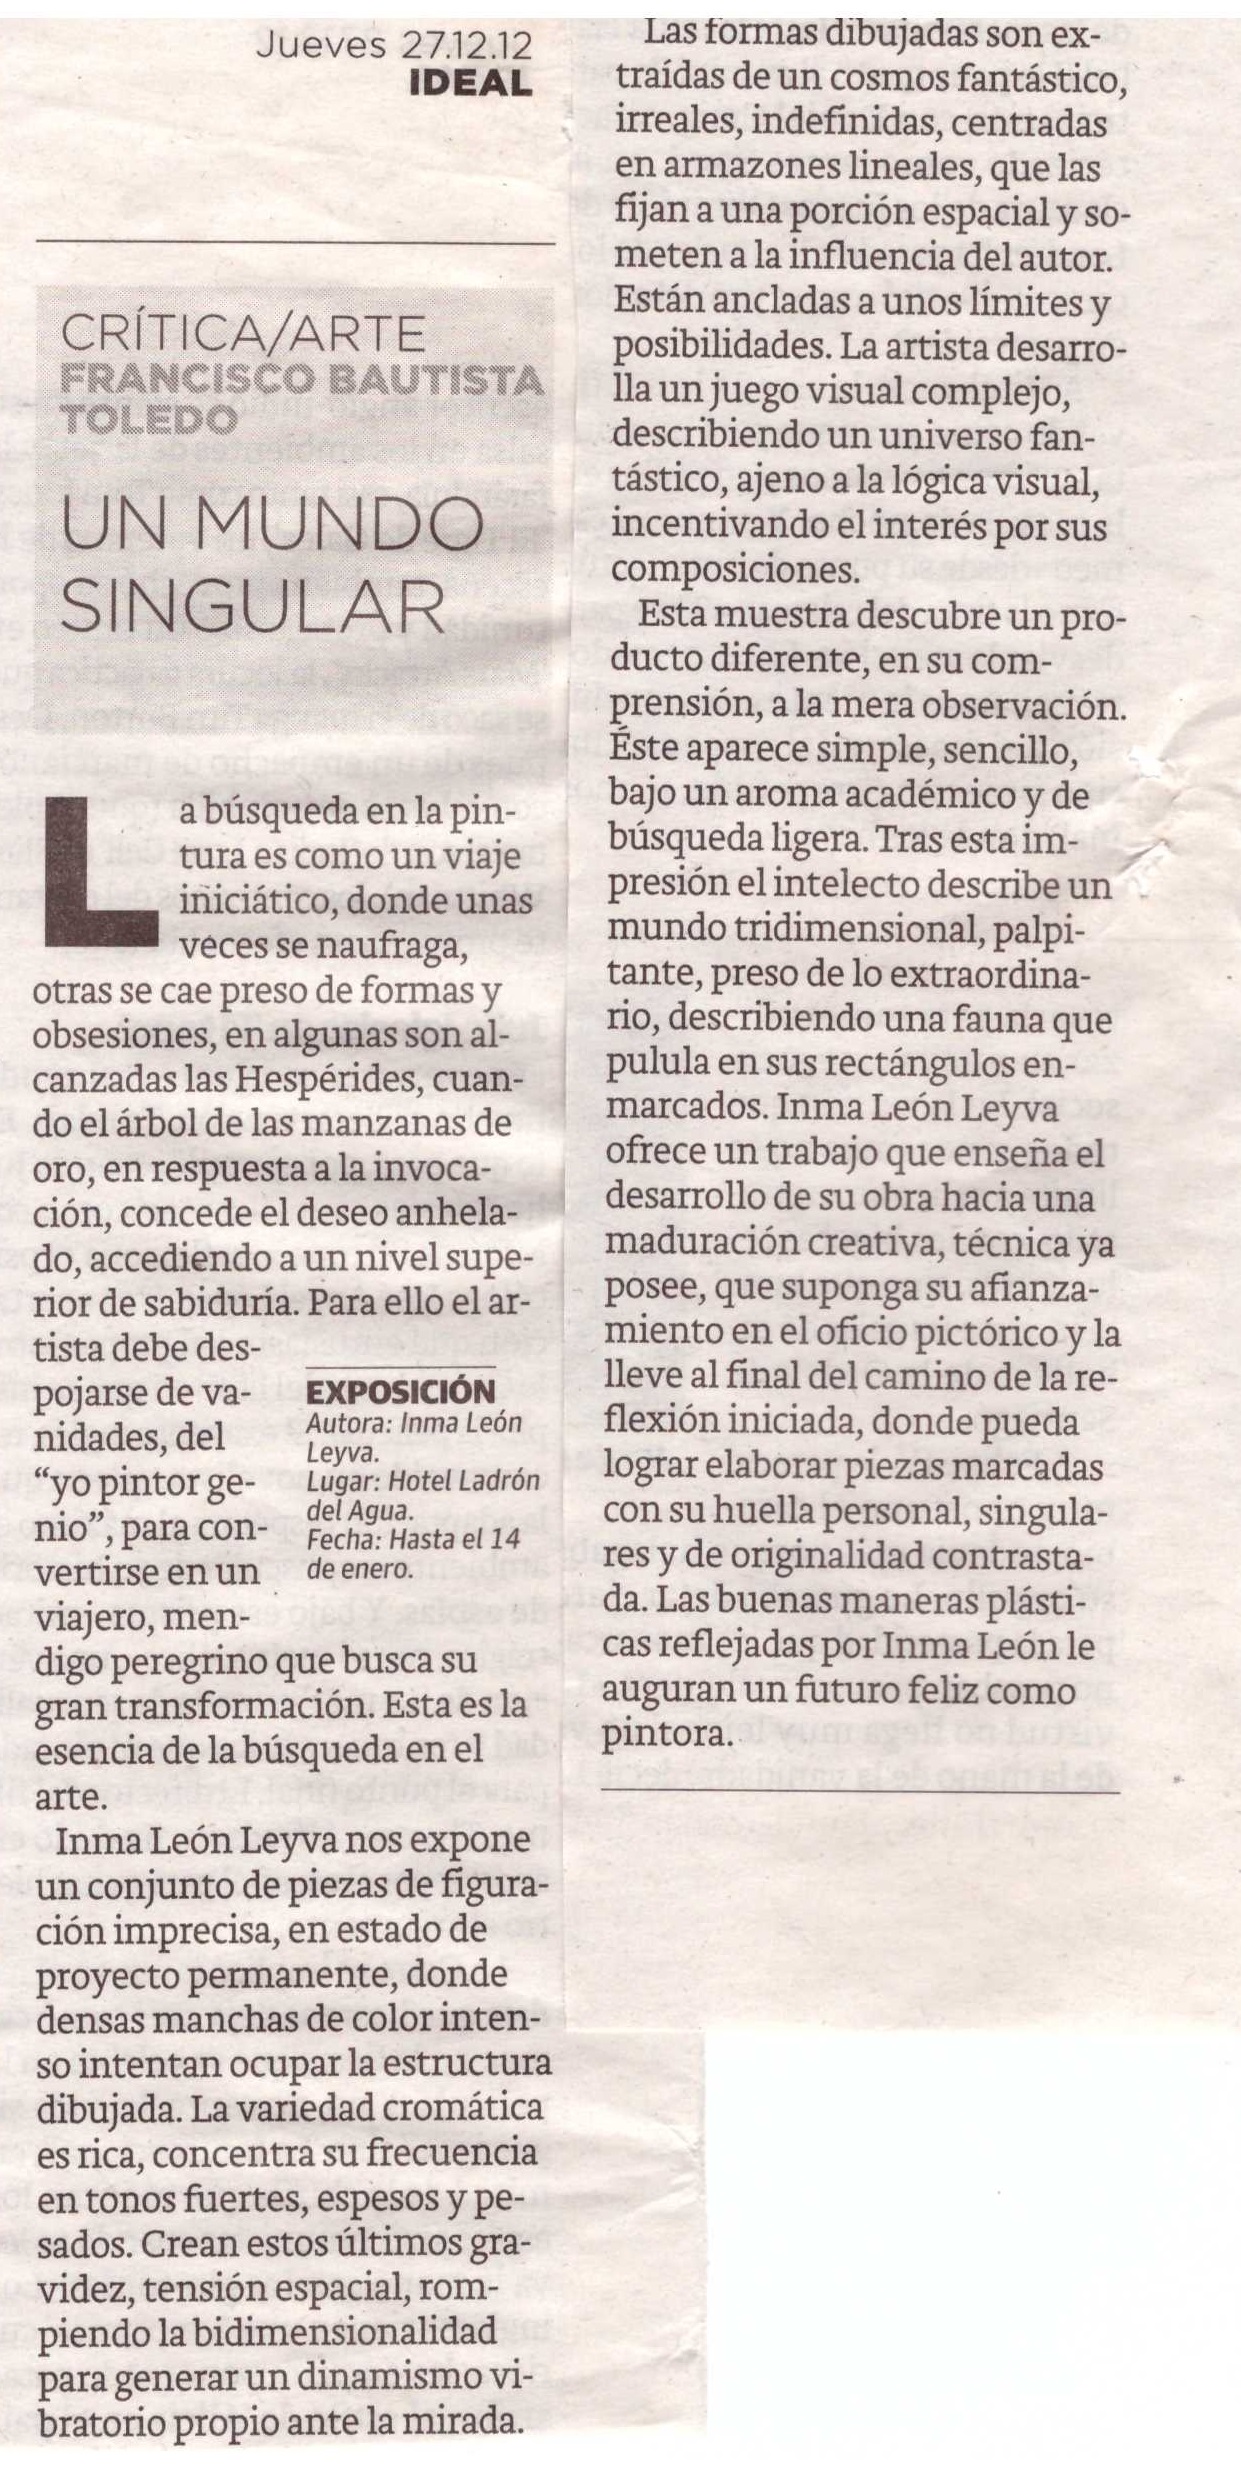 Art review of exhibition by Inma León Leyva (INLELEY)